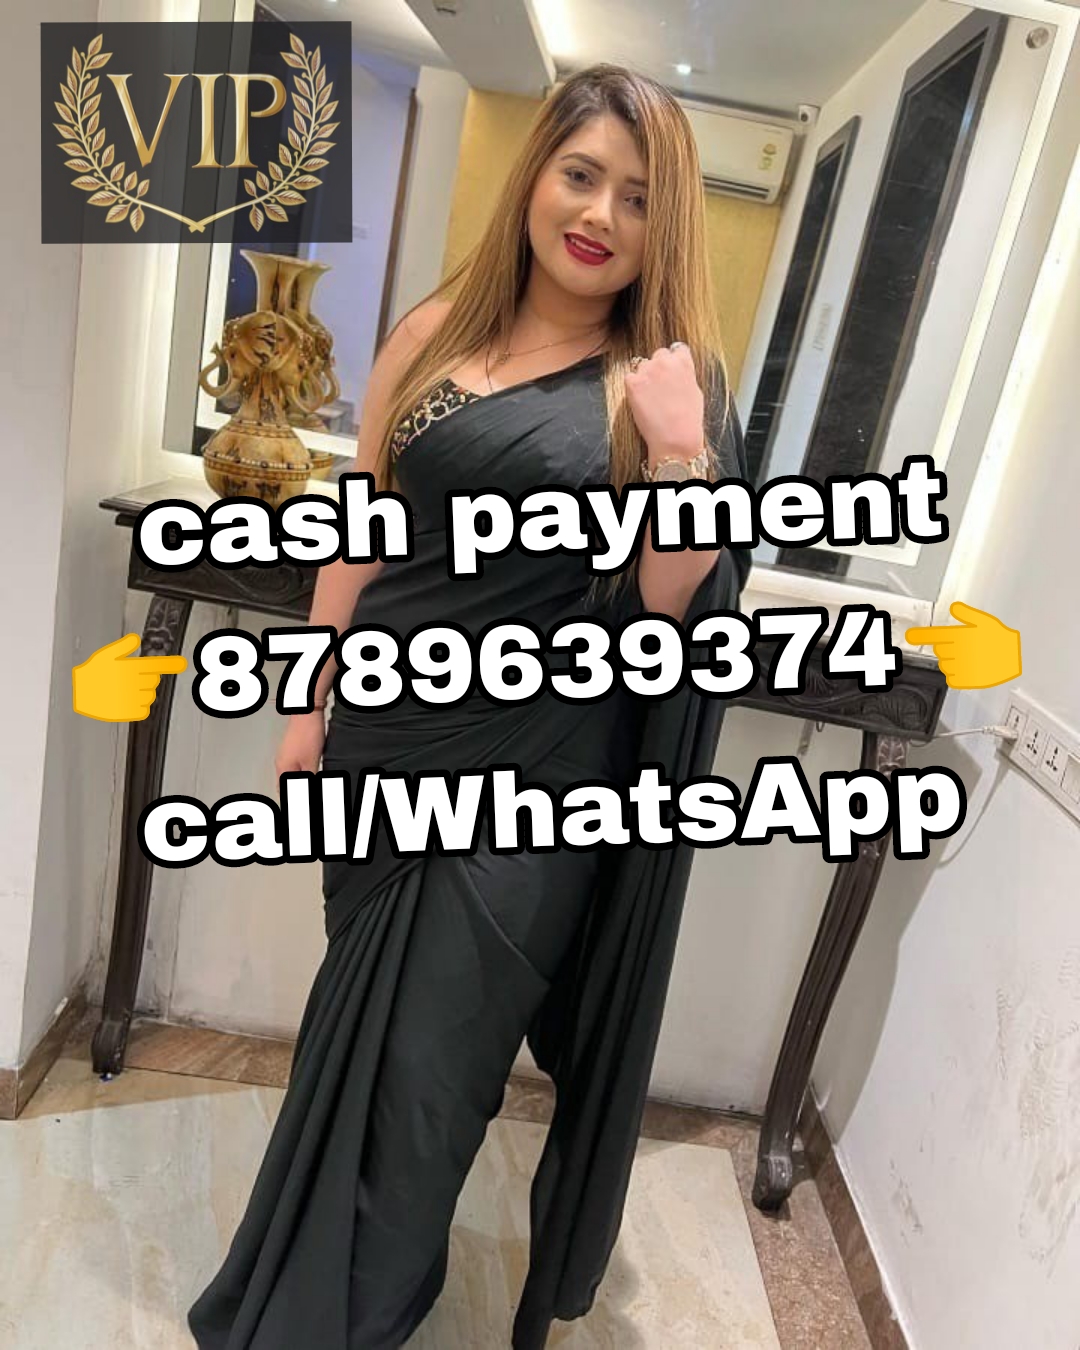 BHUBANESWAR IN VIP MODEL LOW PRICE BEST SERVICE AVAILABLE ANYTIME 